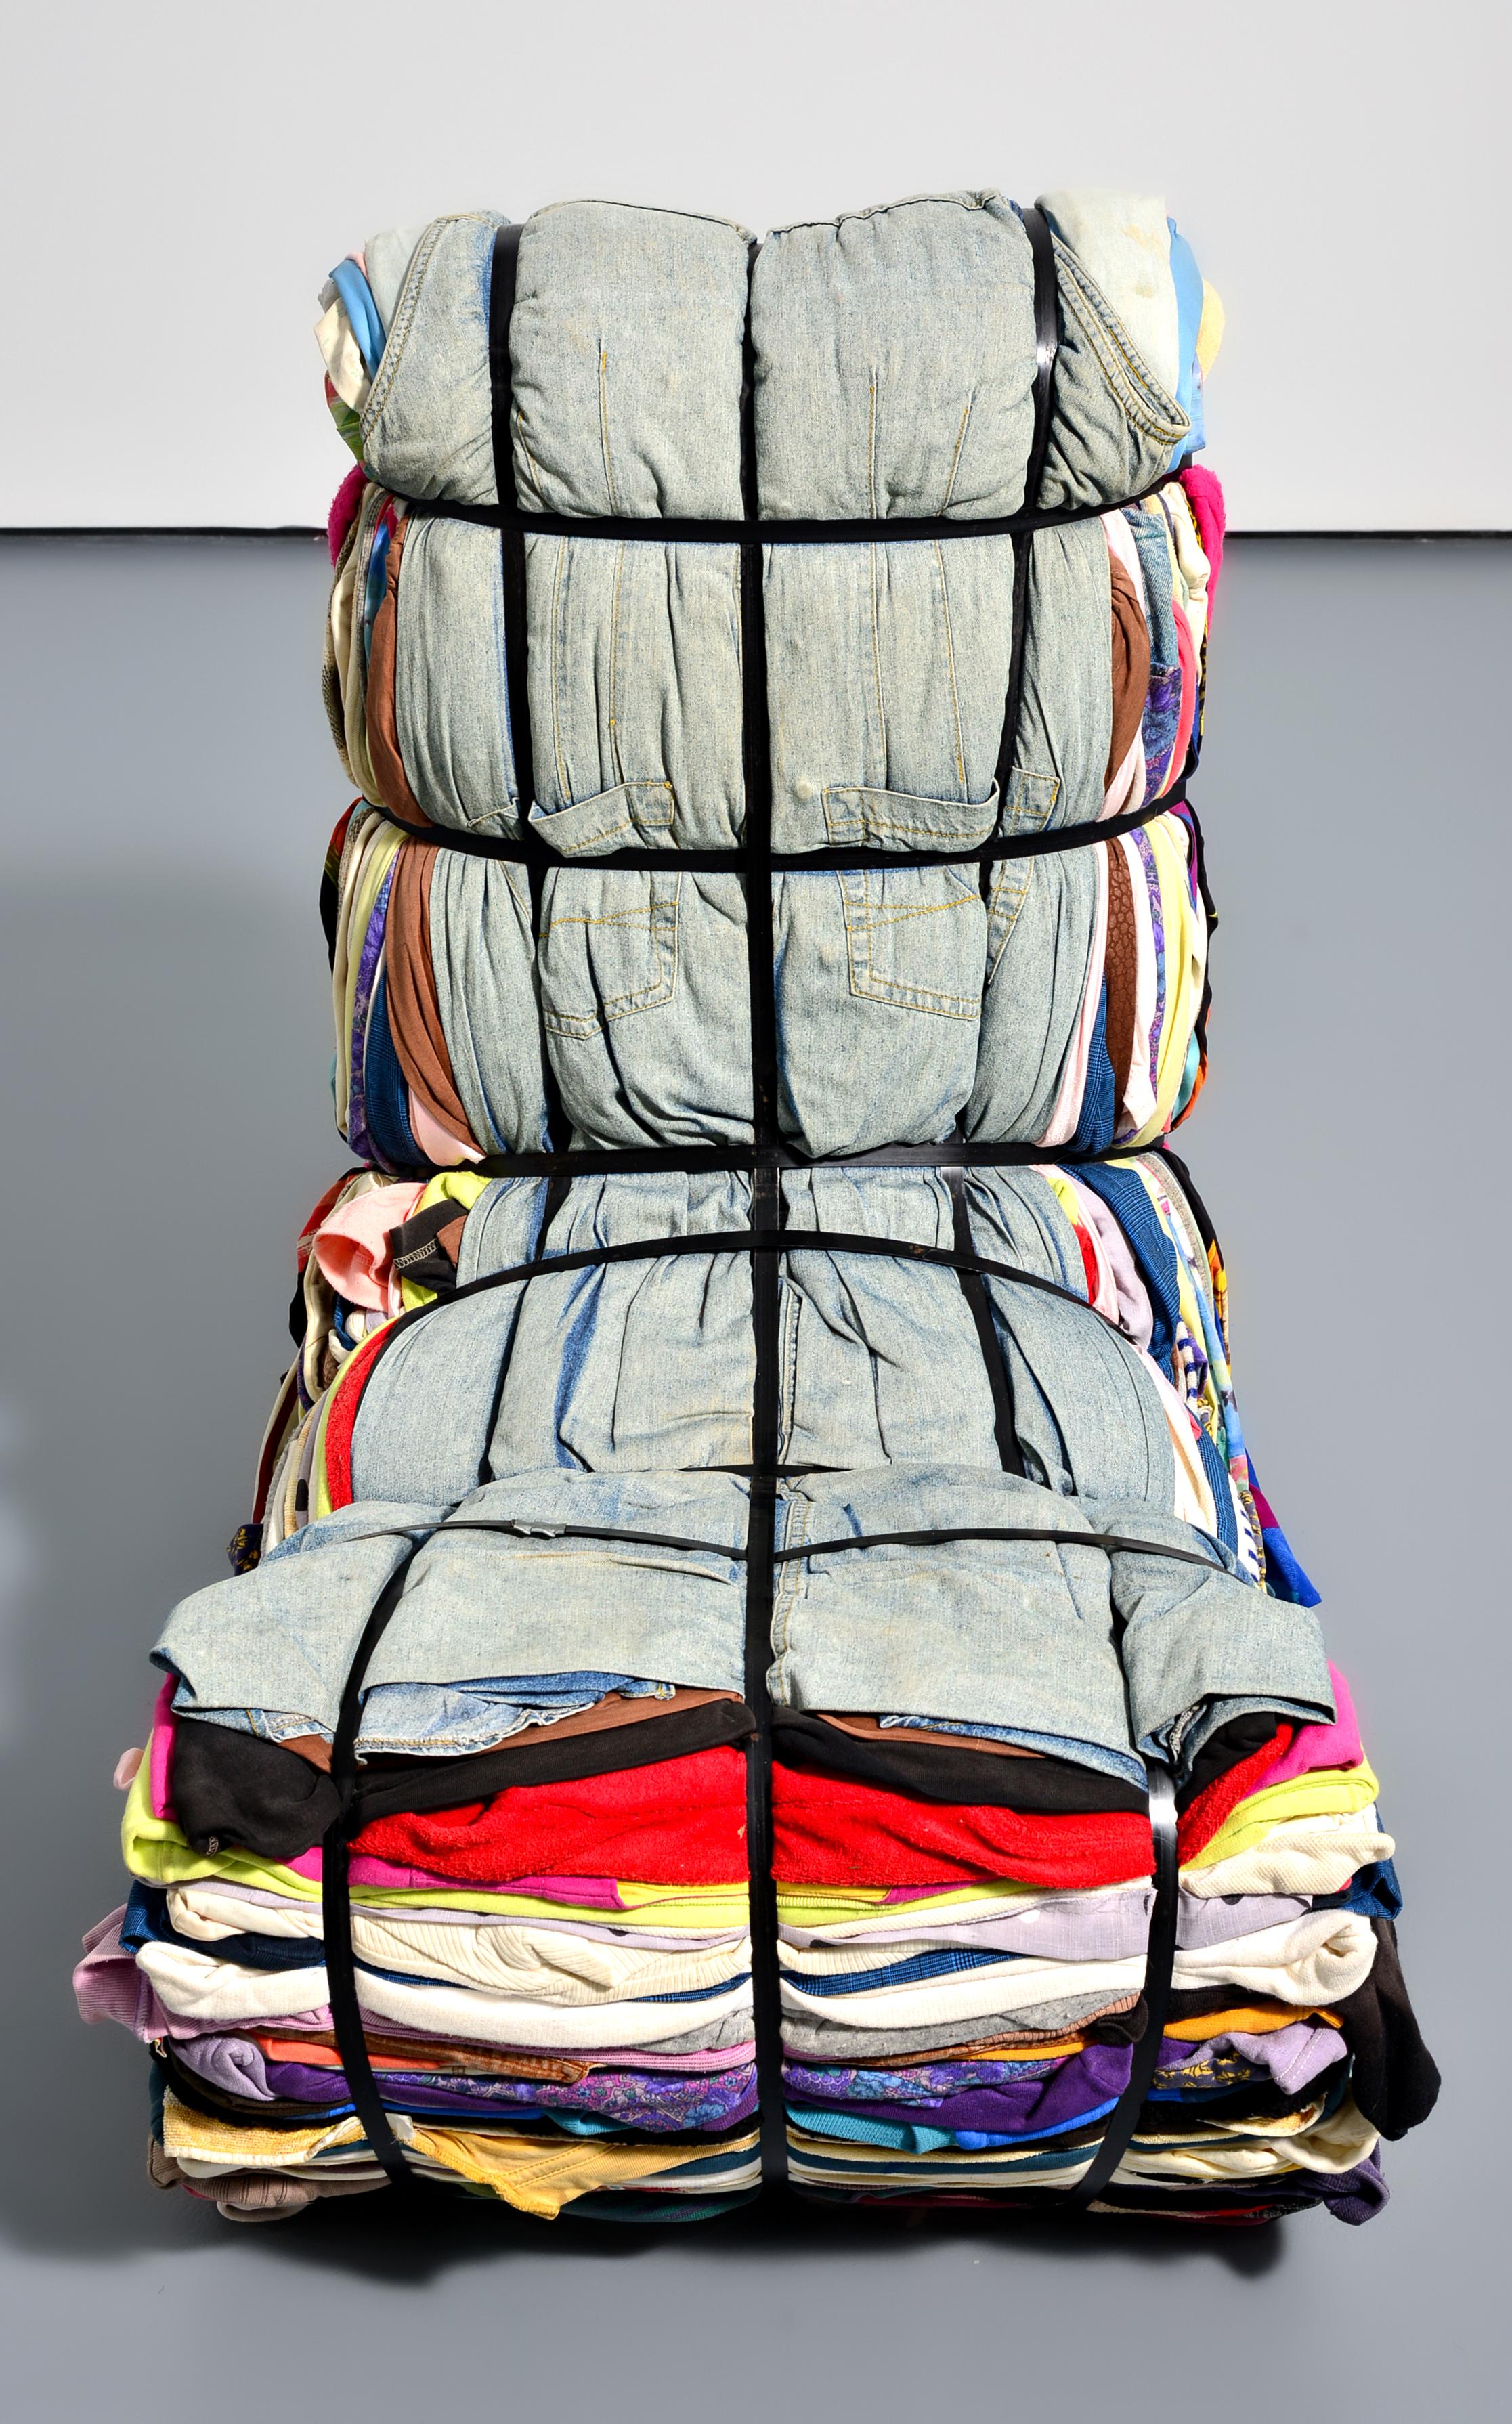 Artist/Designer: Tejo Remy (Dutch, b. 1960)

Additional Information: Each “rag” chair is unique.

Marking(s); notes: no marking(s) apparent

Country of origin; materials: Netherlands; textiles, wood, metal

Dimensions: 34″h, 23″w, 20″d

Condition: